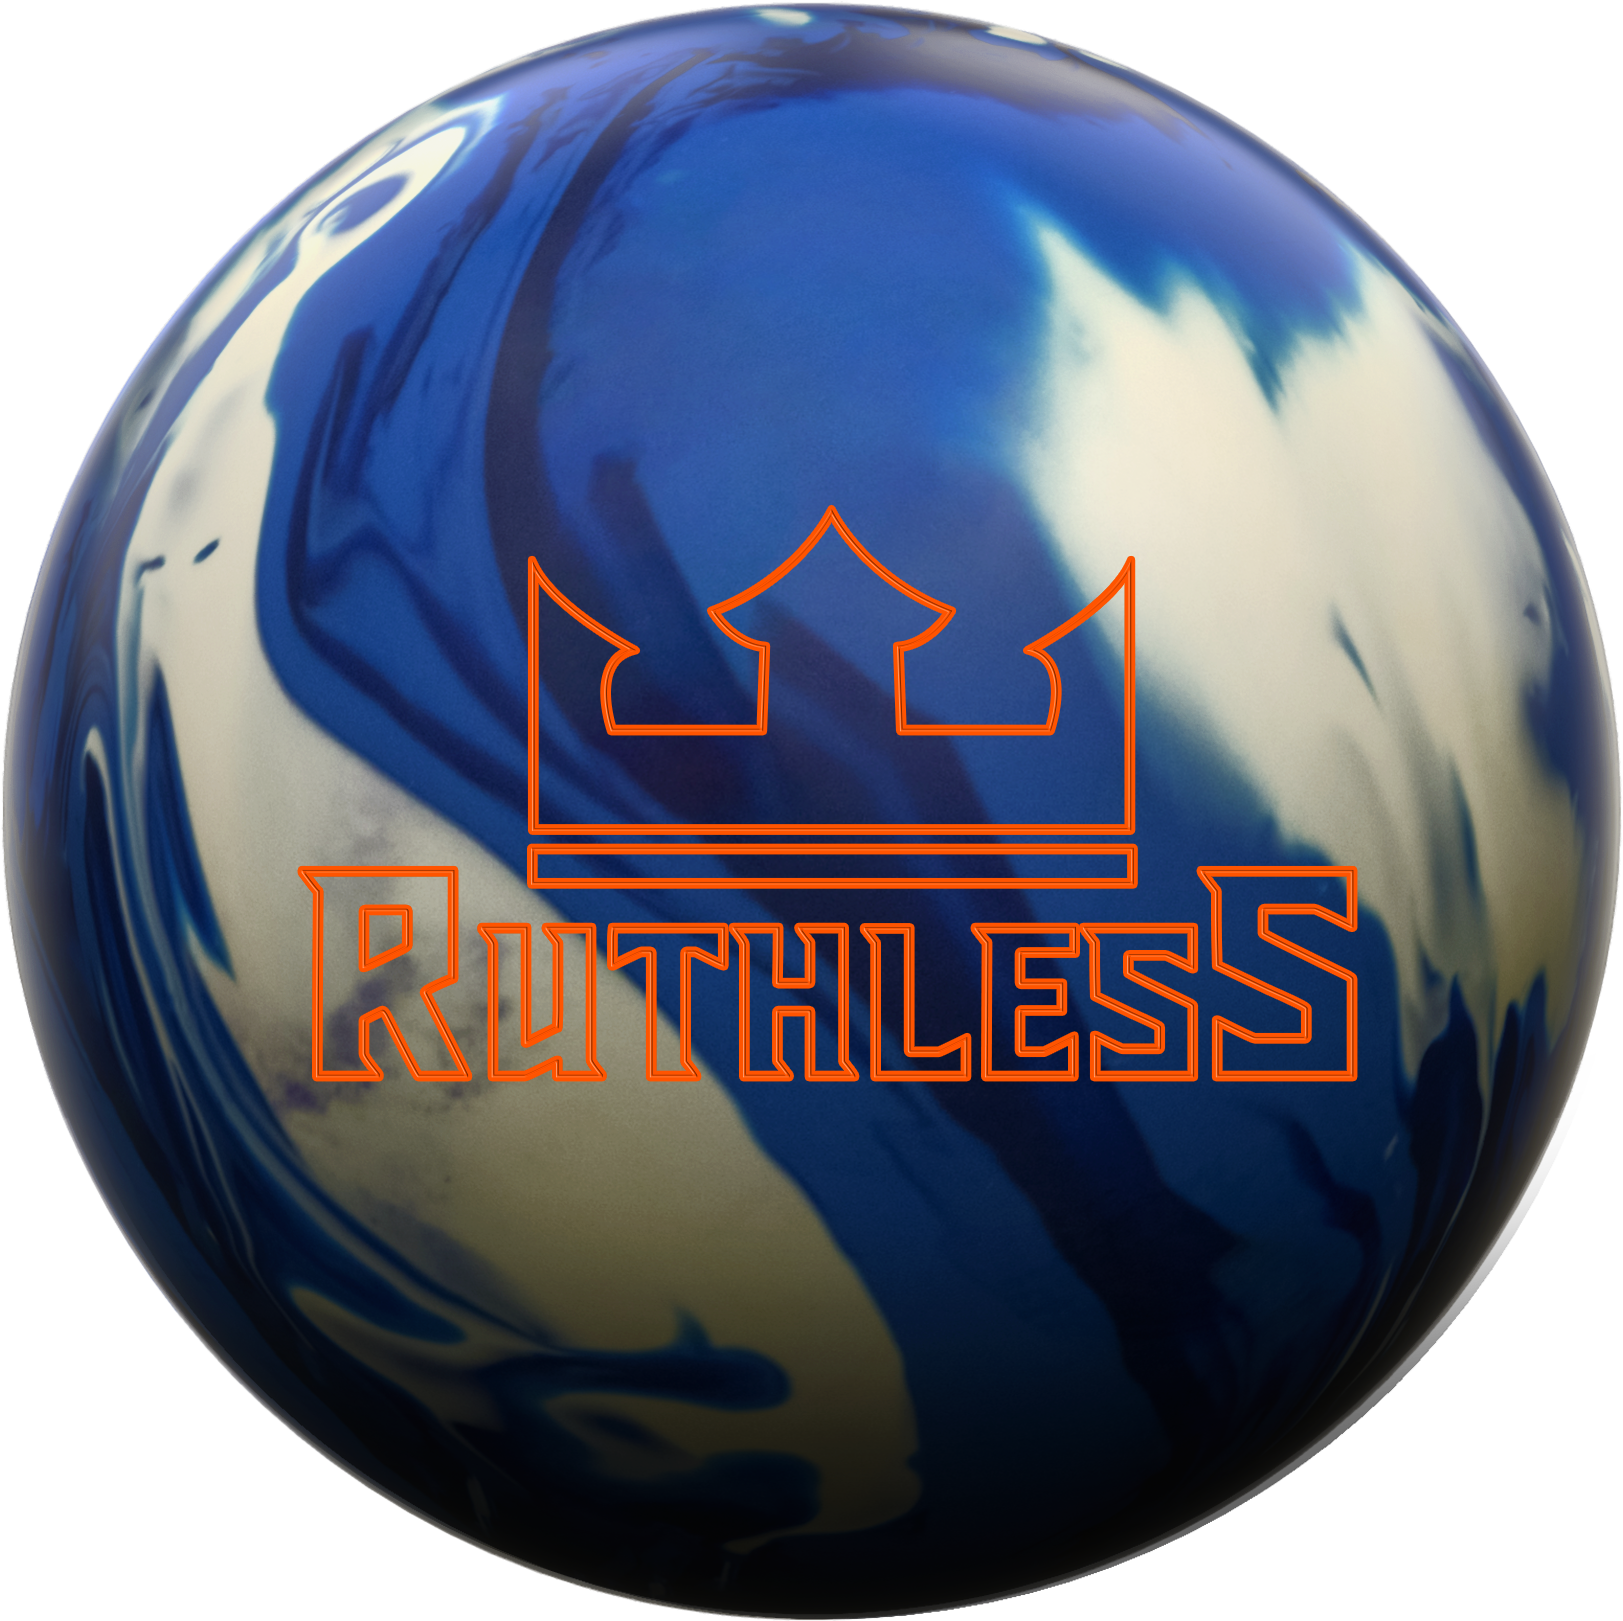 A Blue And White Marbled Ball With Orange Text